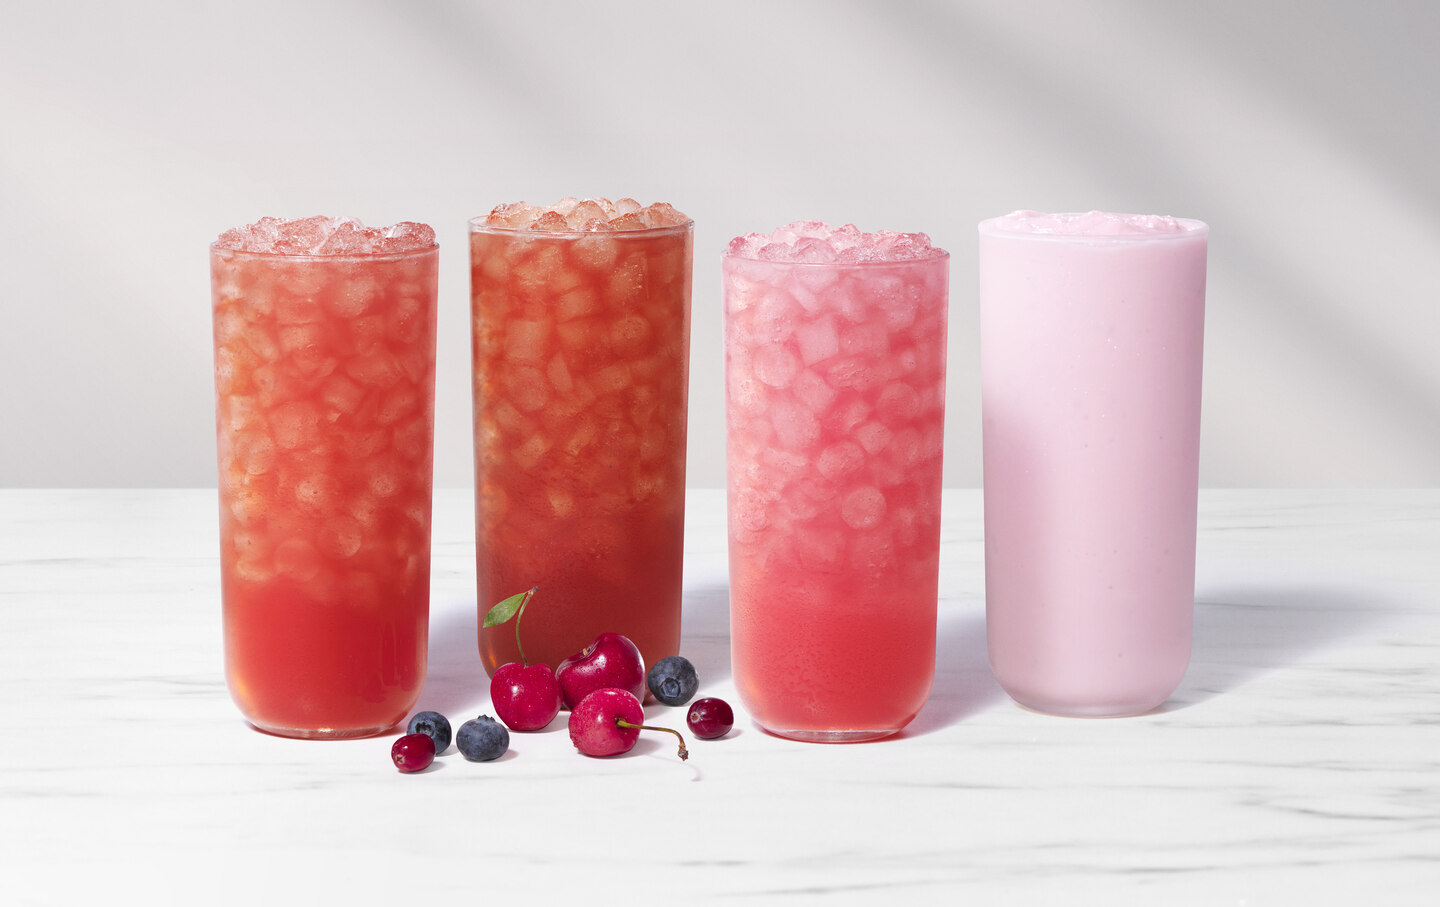 The new seasonal Cherry Berry beverages from Chick-fil-A.